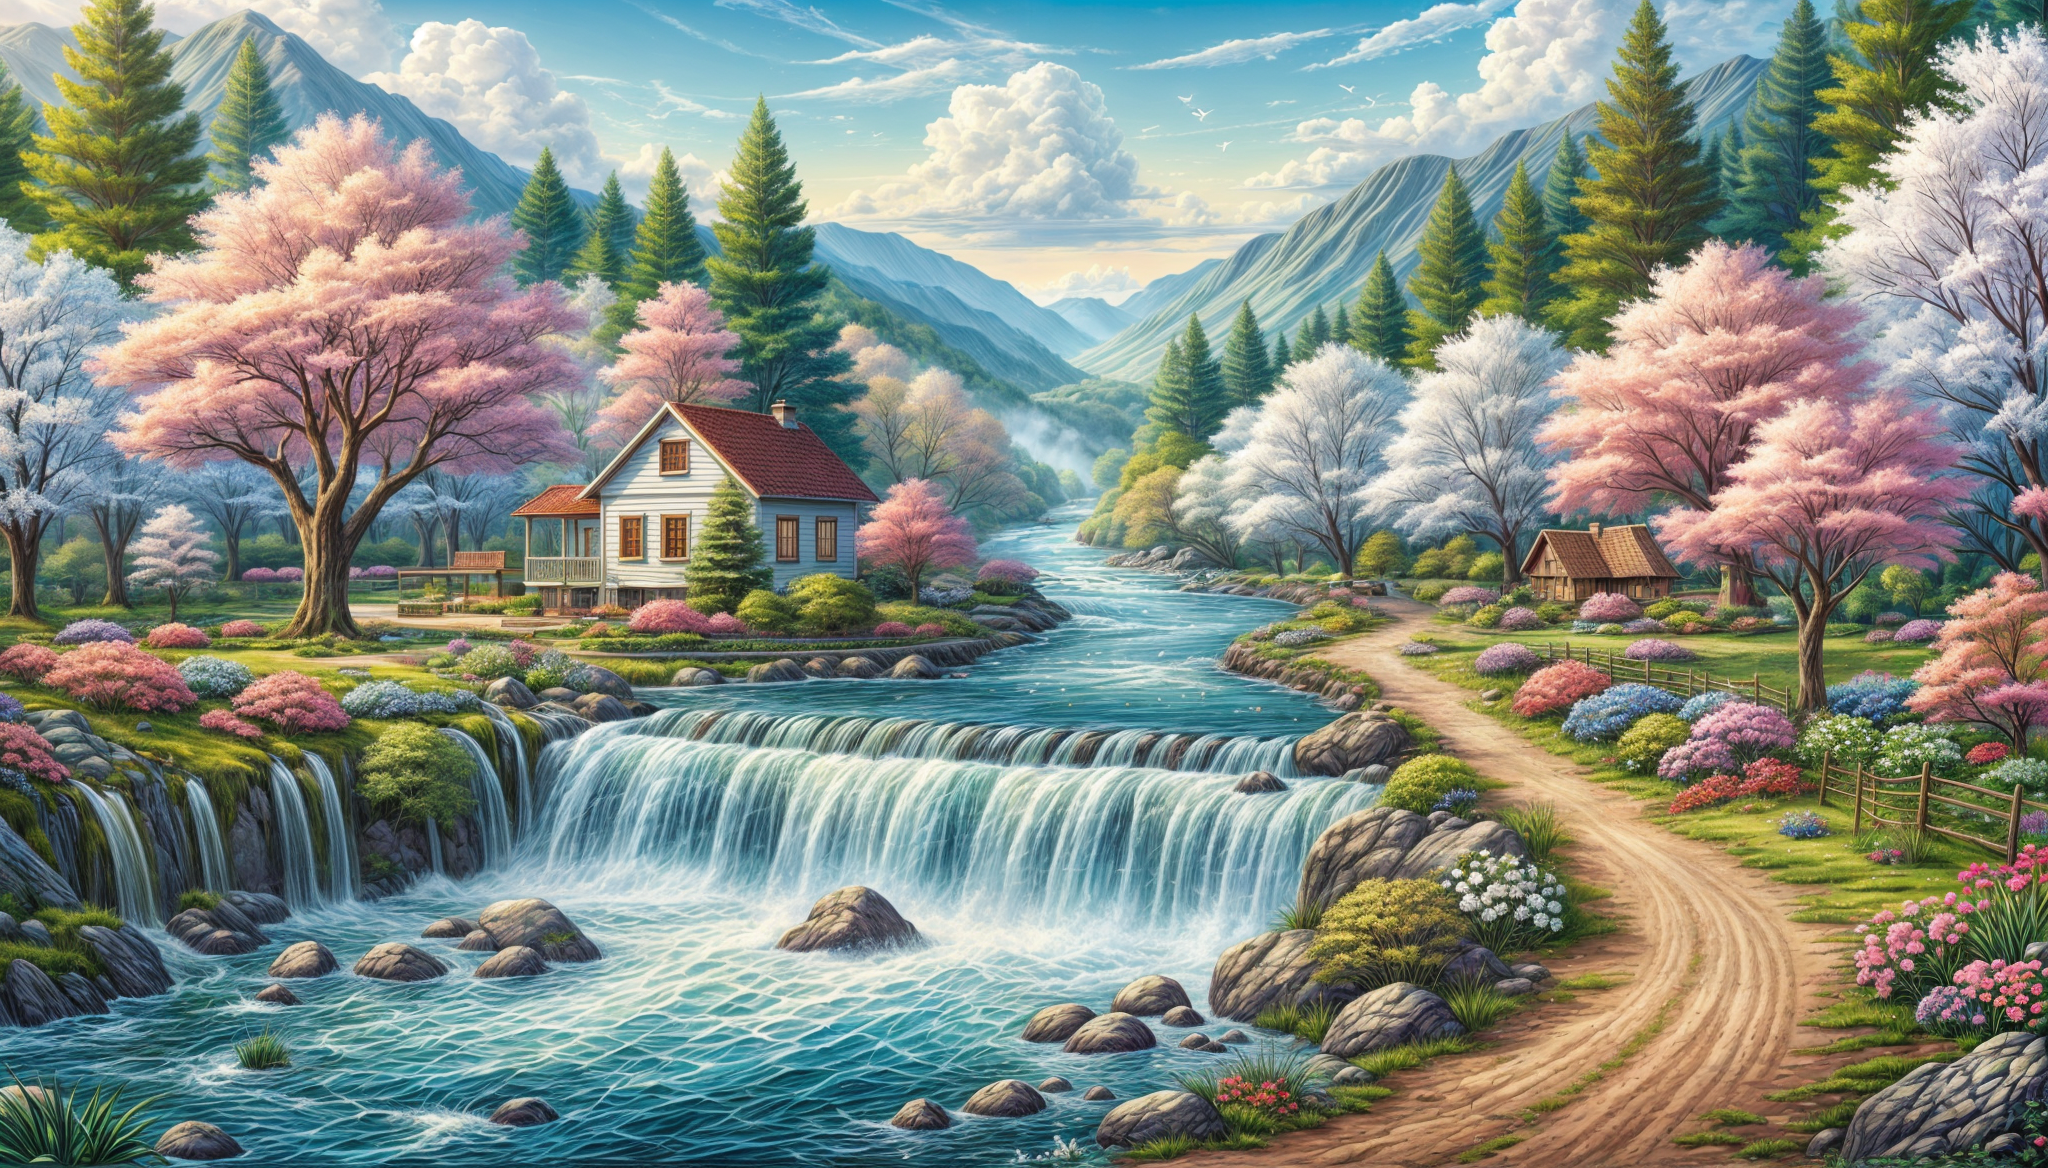 General 2048x1168 forest house AI art path trees water waterfall sunlight rocks mountains sky flowers river nature